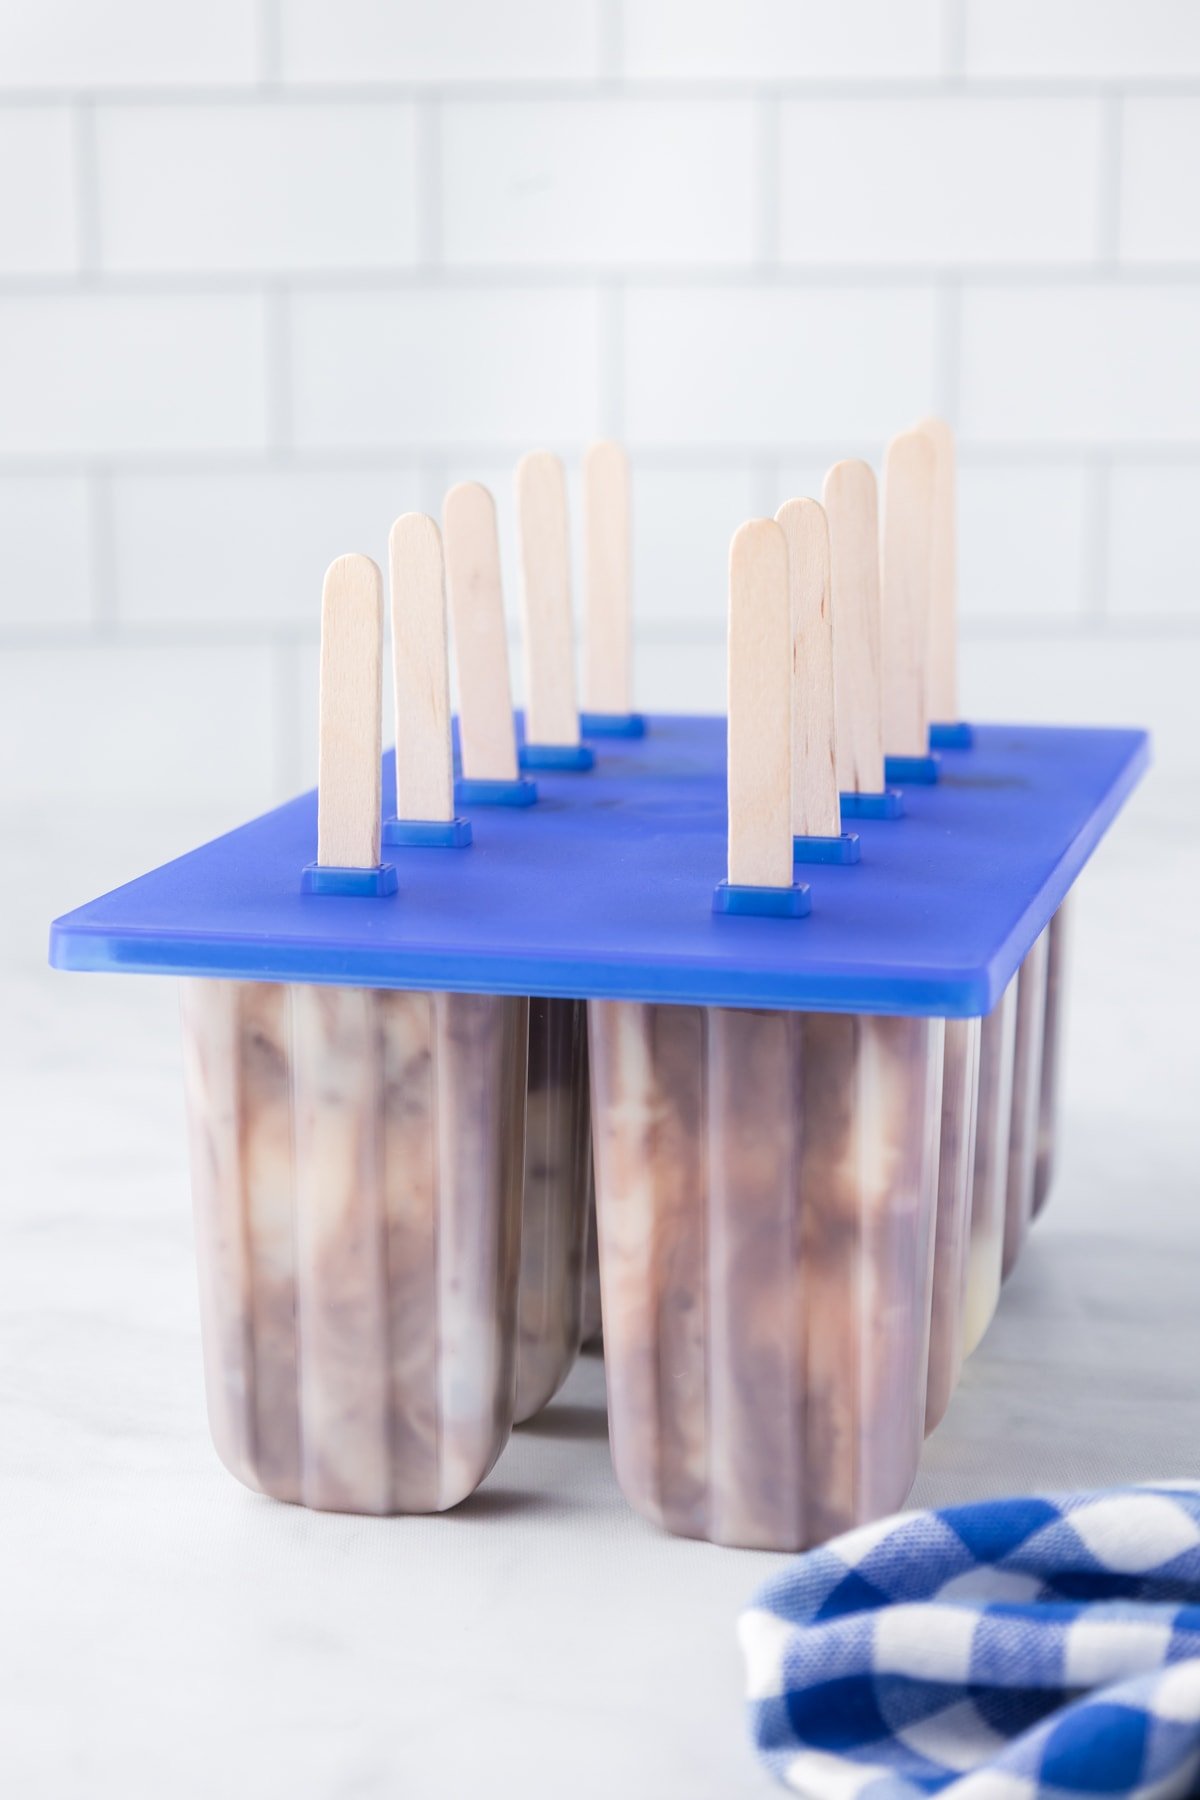 jello pudding pops frozen in popsicle mold